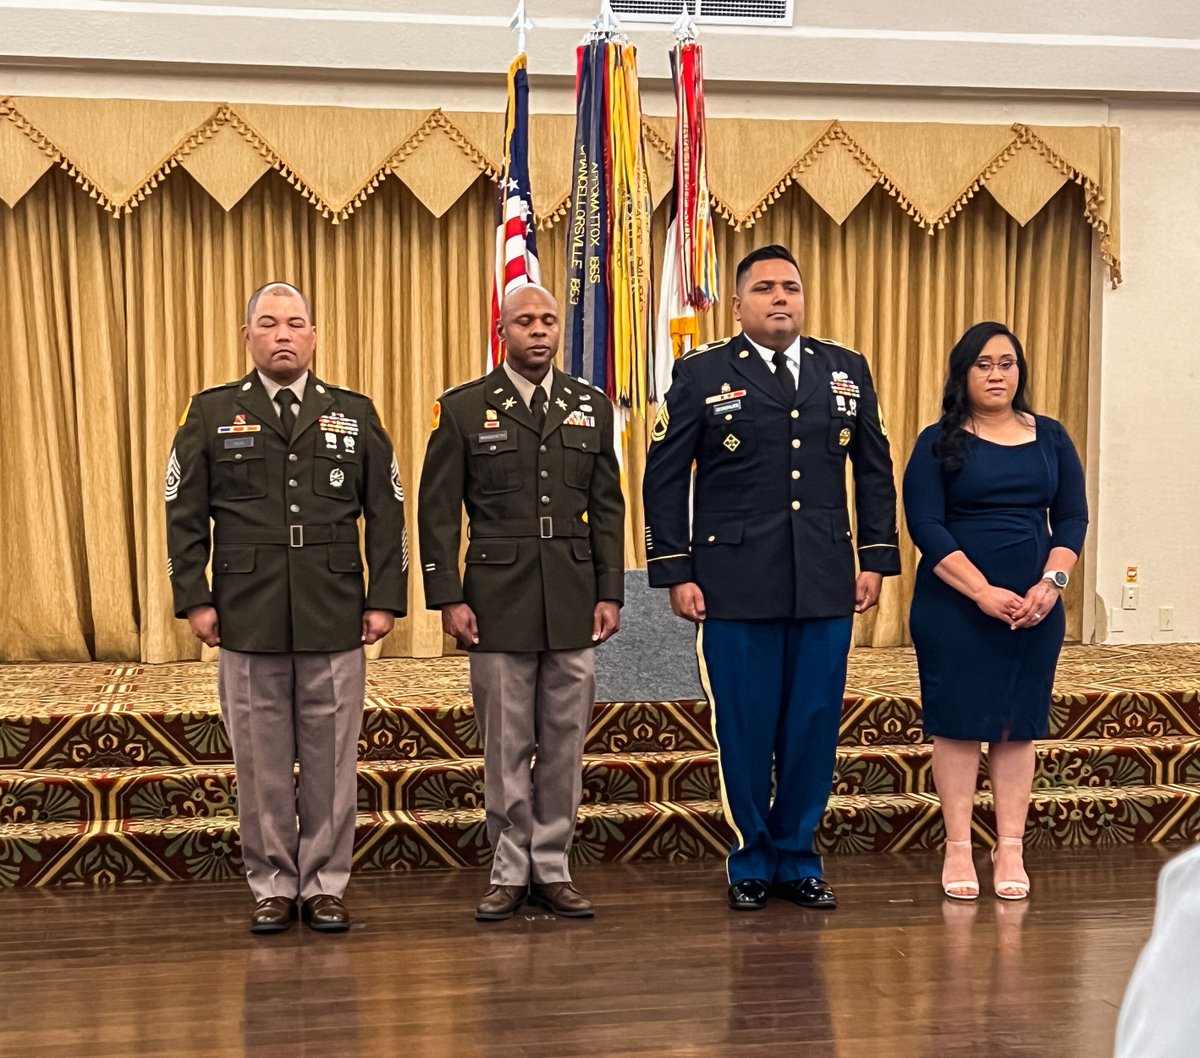 🎉 Celebrating an incredible milestone! SFC Gonzalez, a graduate of our CSP course, celebrated his retirement on April 26th. As the first to pave the way, his journey inspires us all. Here's to an inspiring legacy and a well-deserved farewell! 🎓 #Celebration #KilleenTexas #DSDT